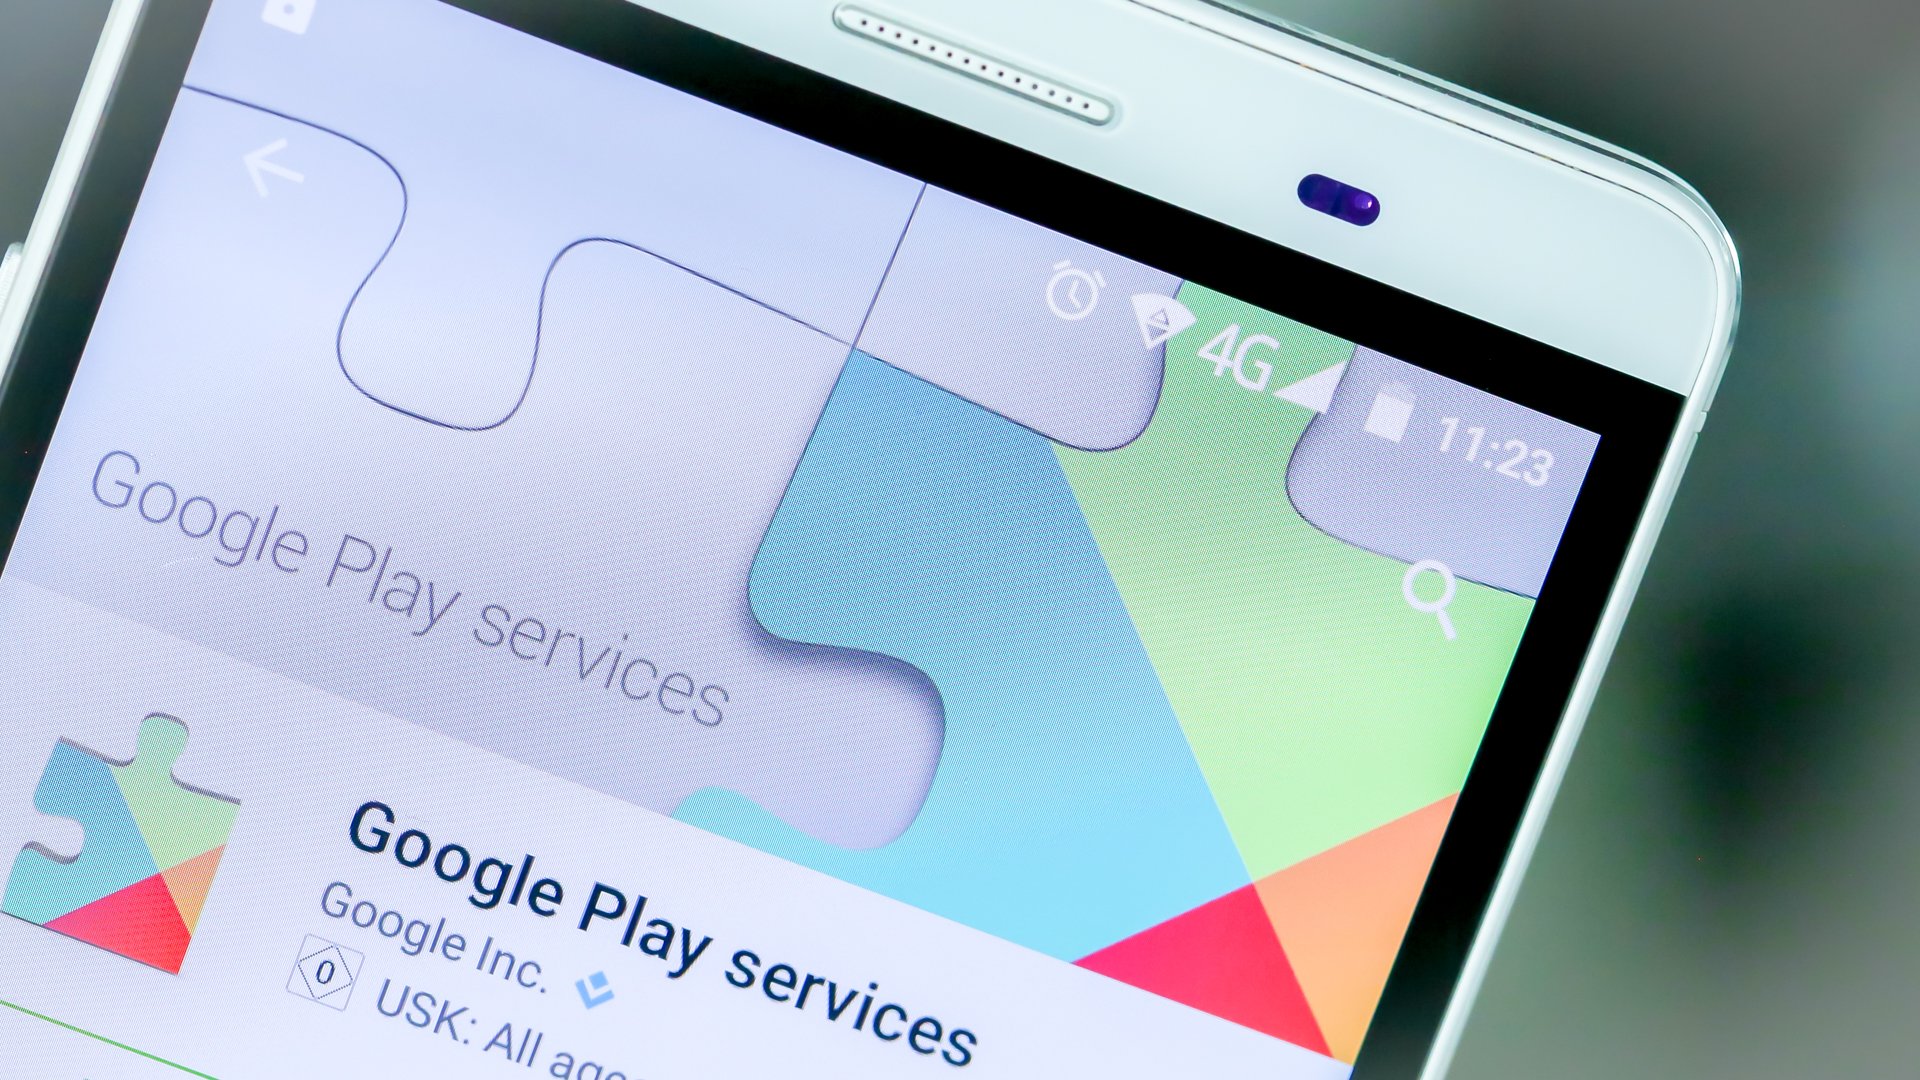 Download google play services on my android phone